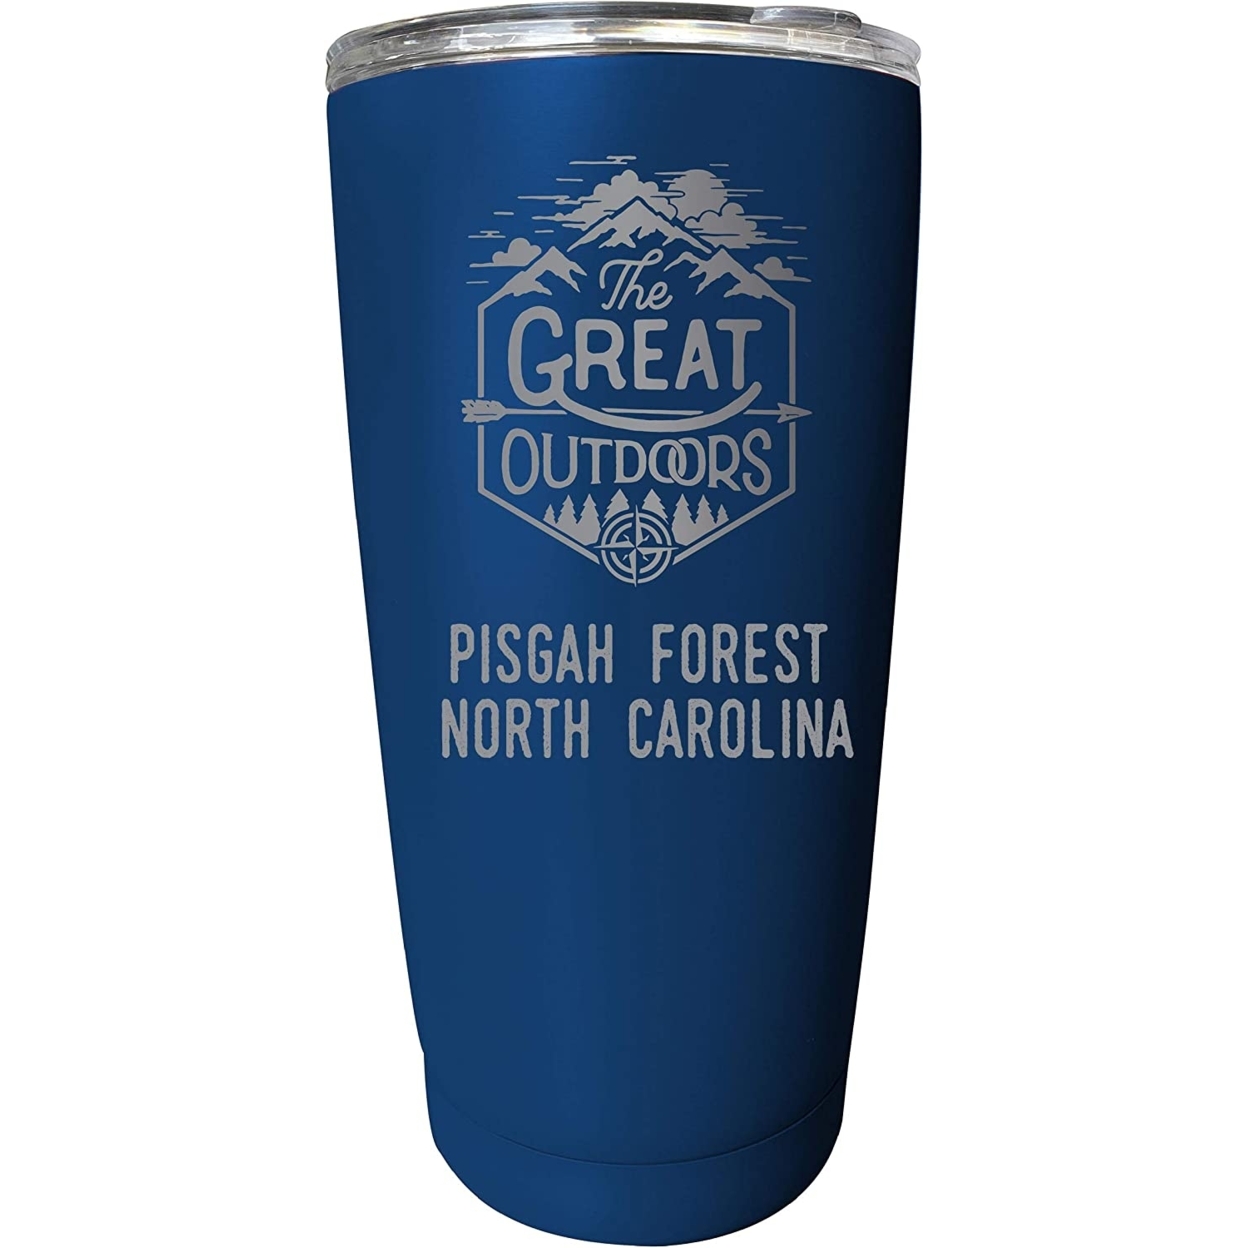 Pisgah Forest North Carolina Etched 16 Oz Stainless Steel Insulated Tumbler Outdoor Adventure Design - Navy